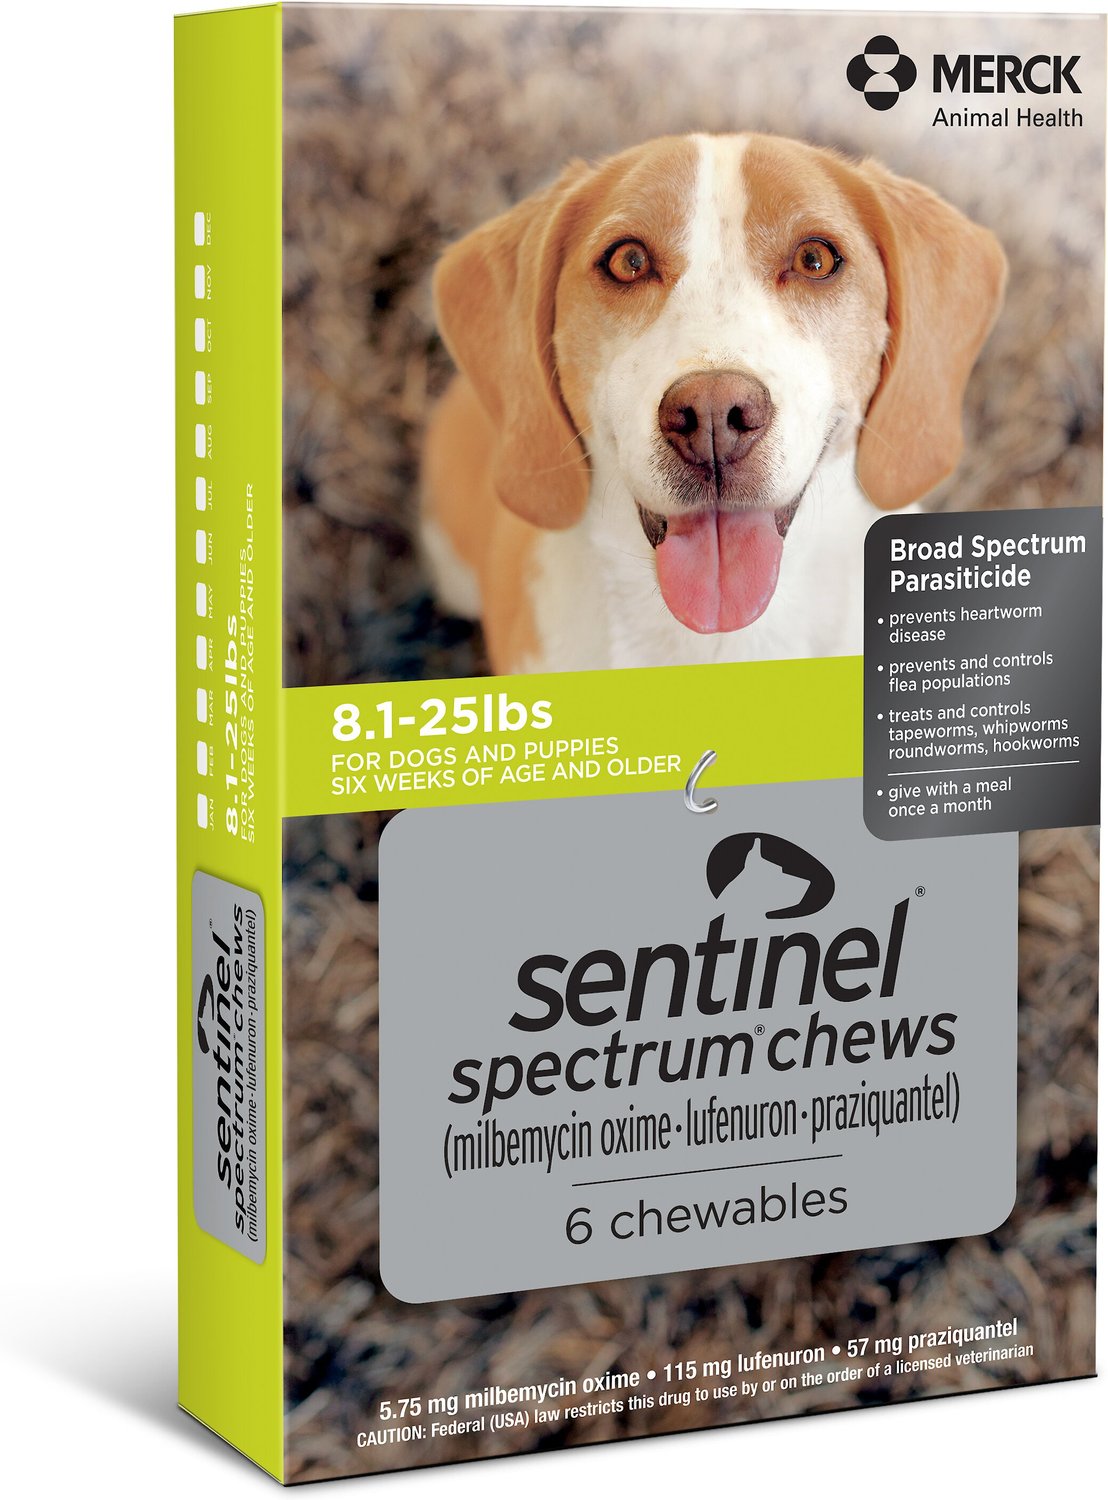 sentinel-spectrum-chewable-tablets-for-dogs-8-1-25-lbs-green-box